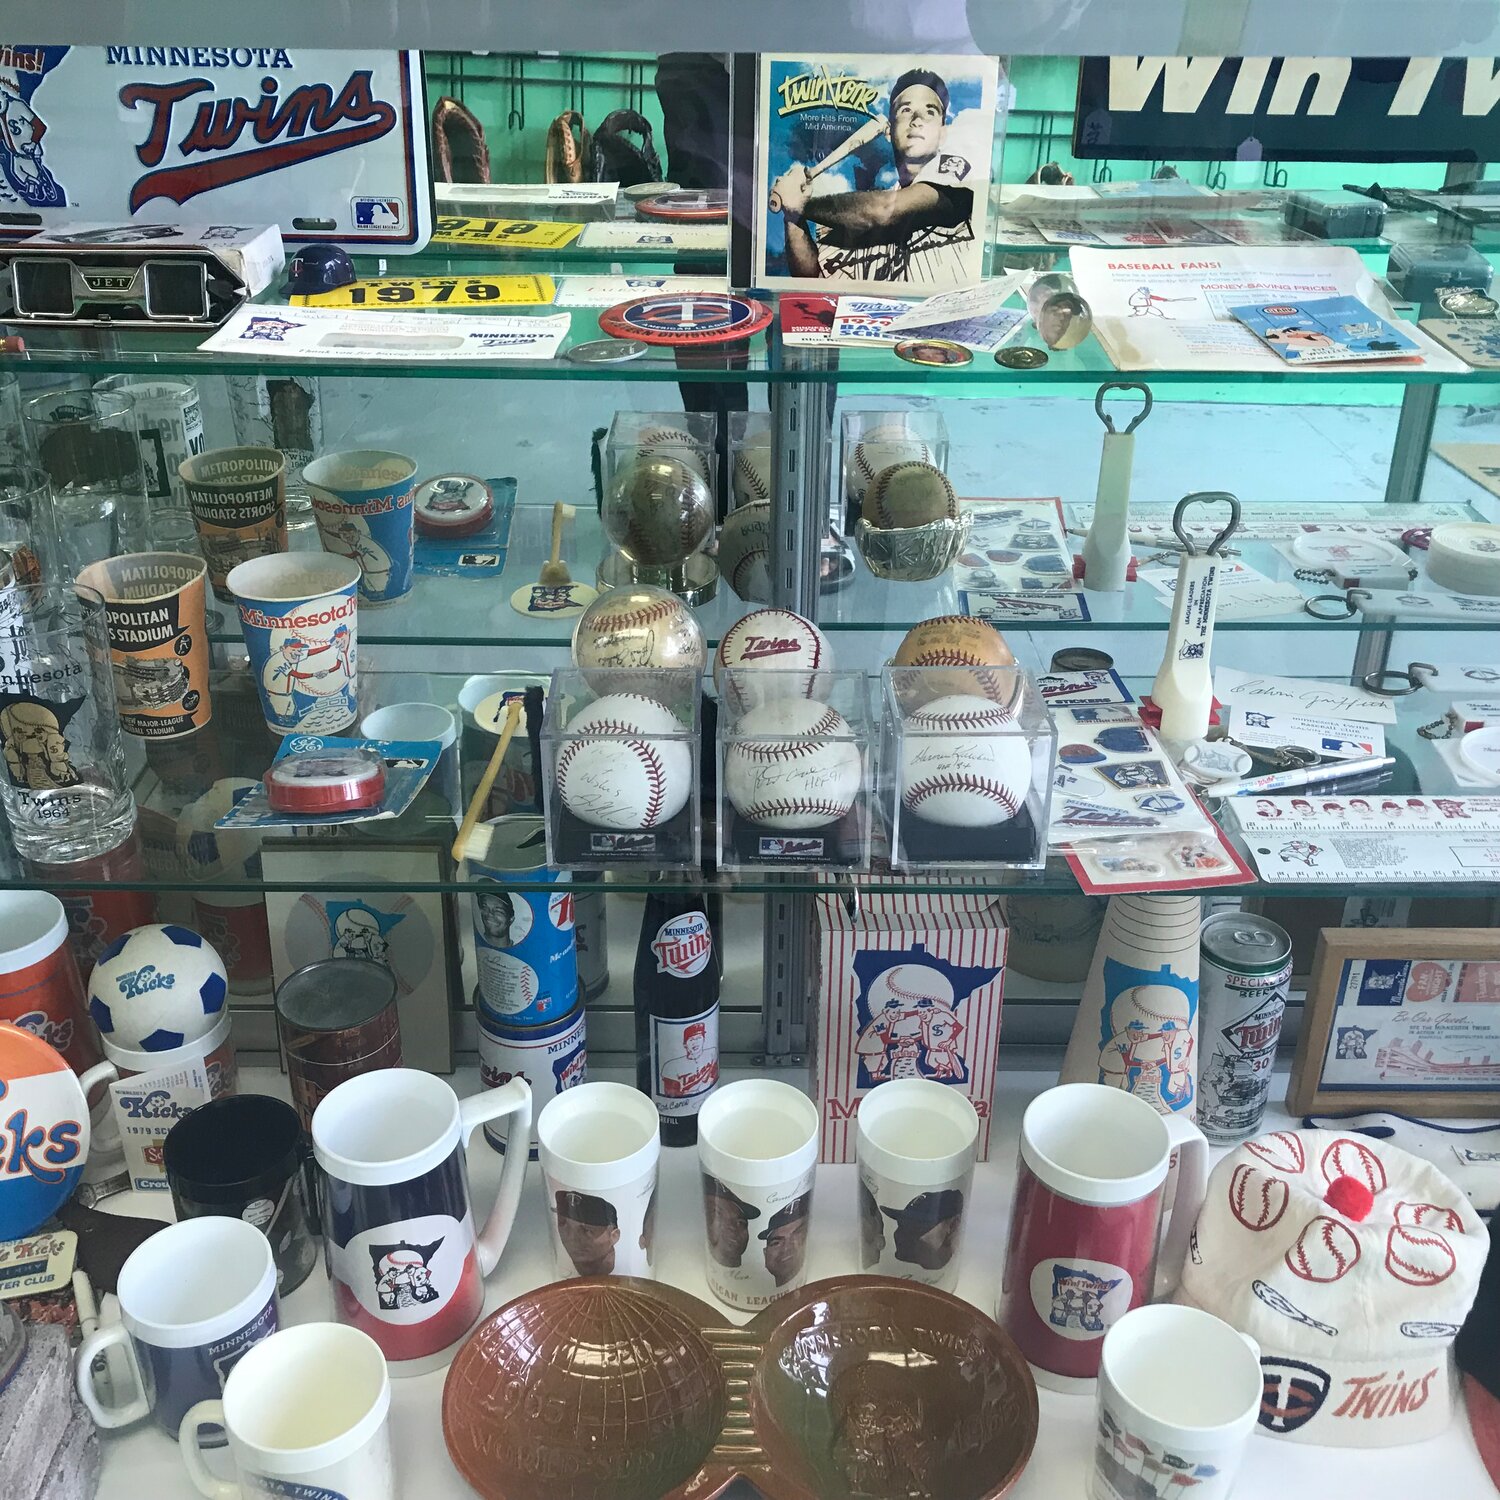 There's a treasure trove of memorabilia inside D&J Glove. (Photo by Jane St. Anthony)